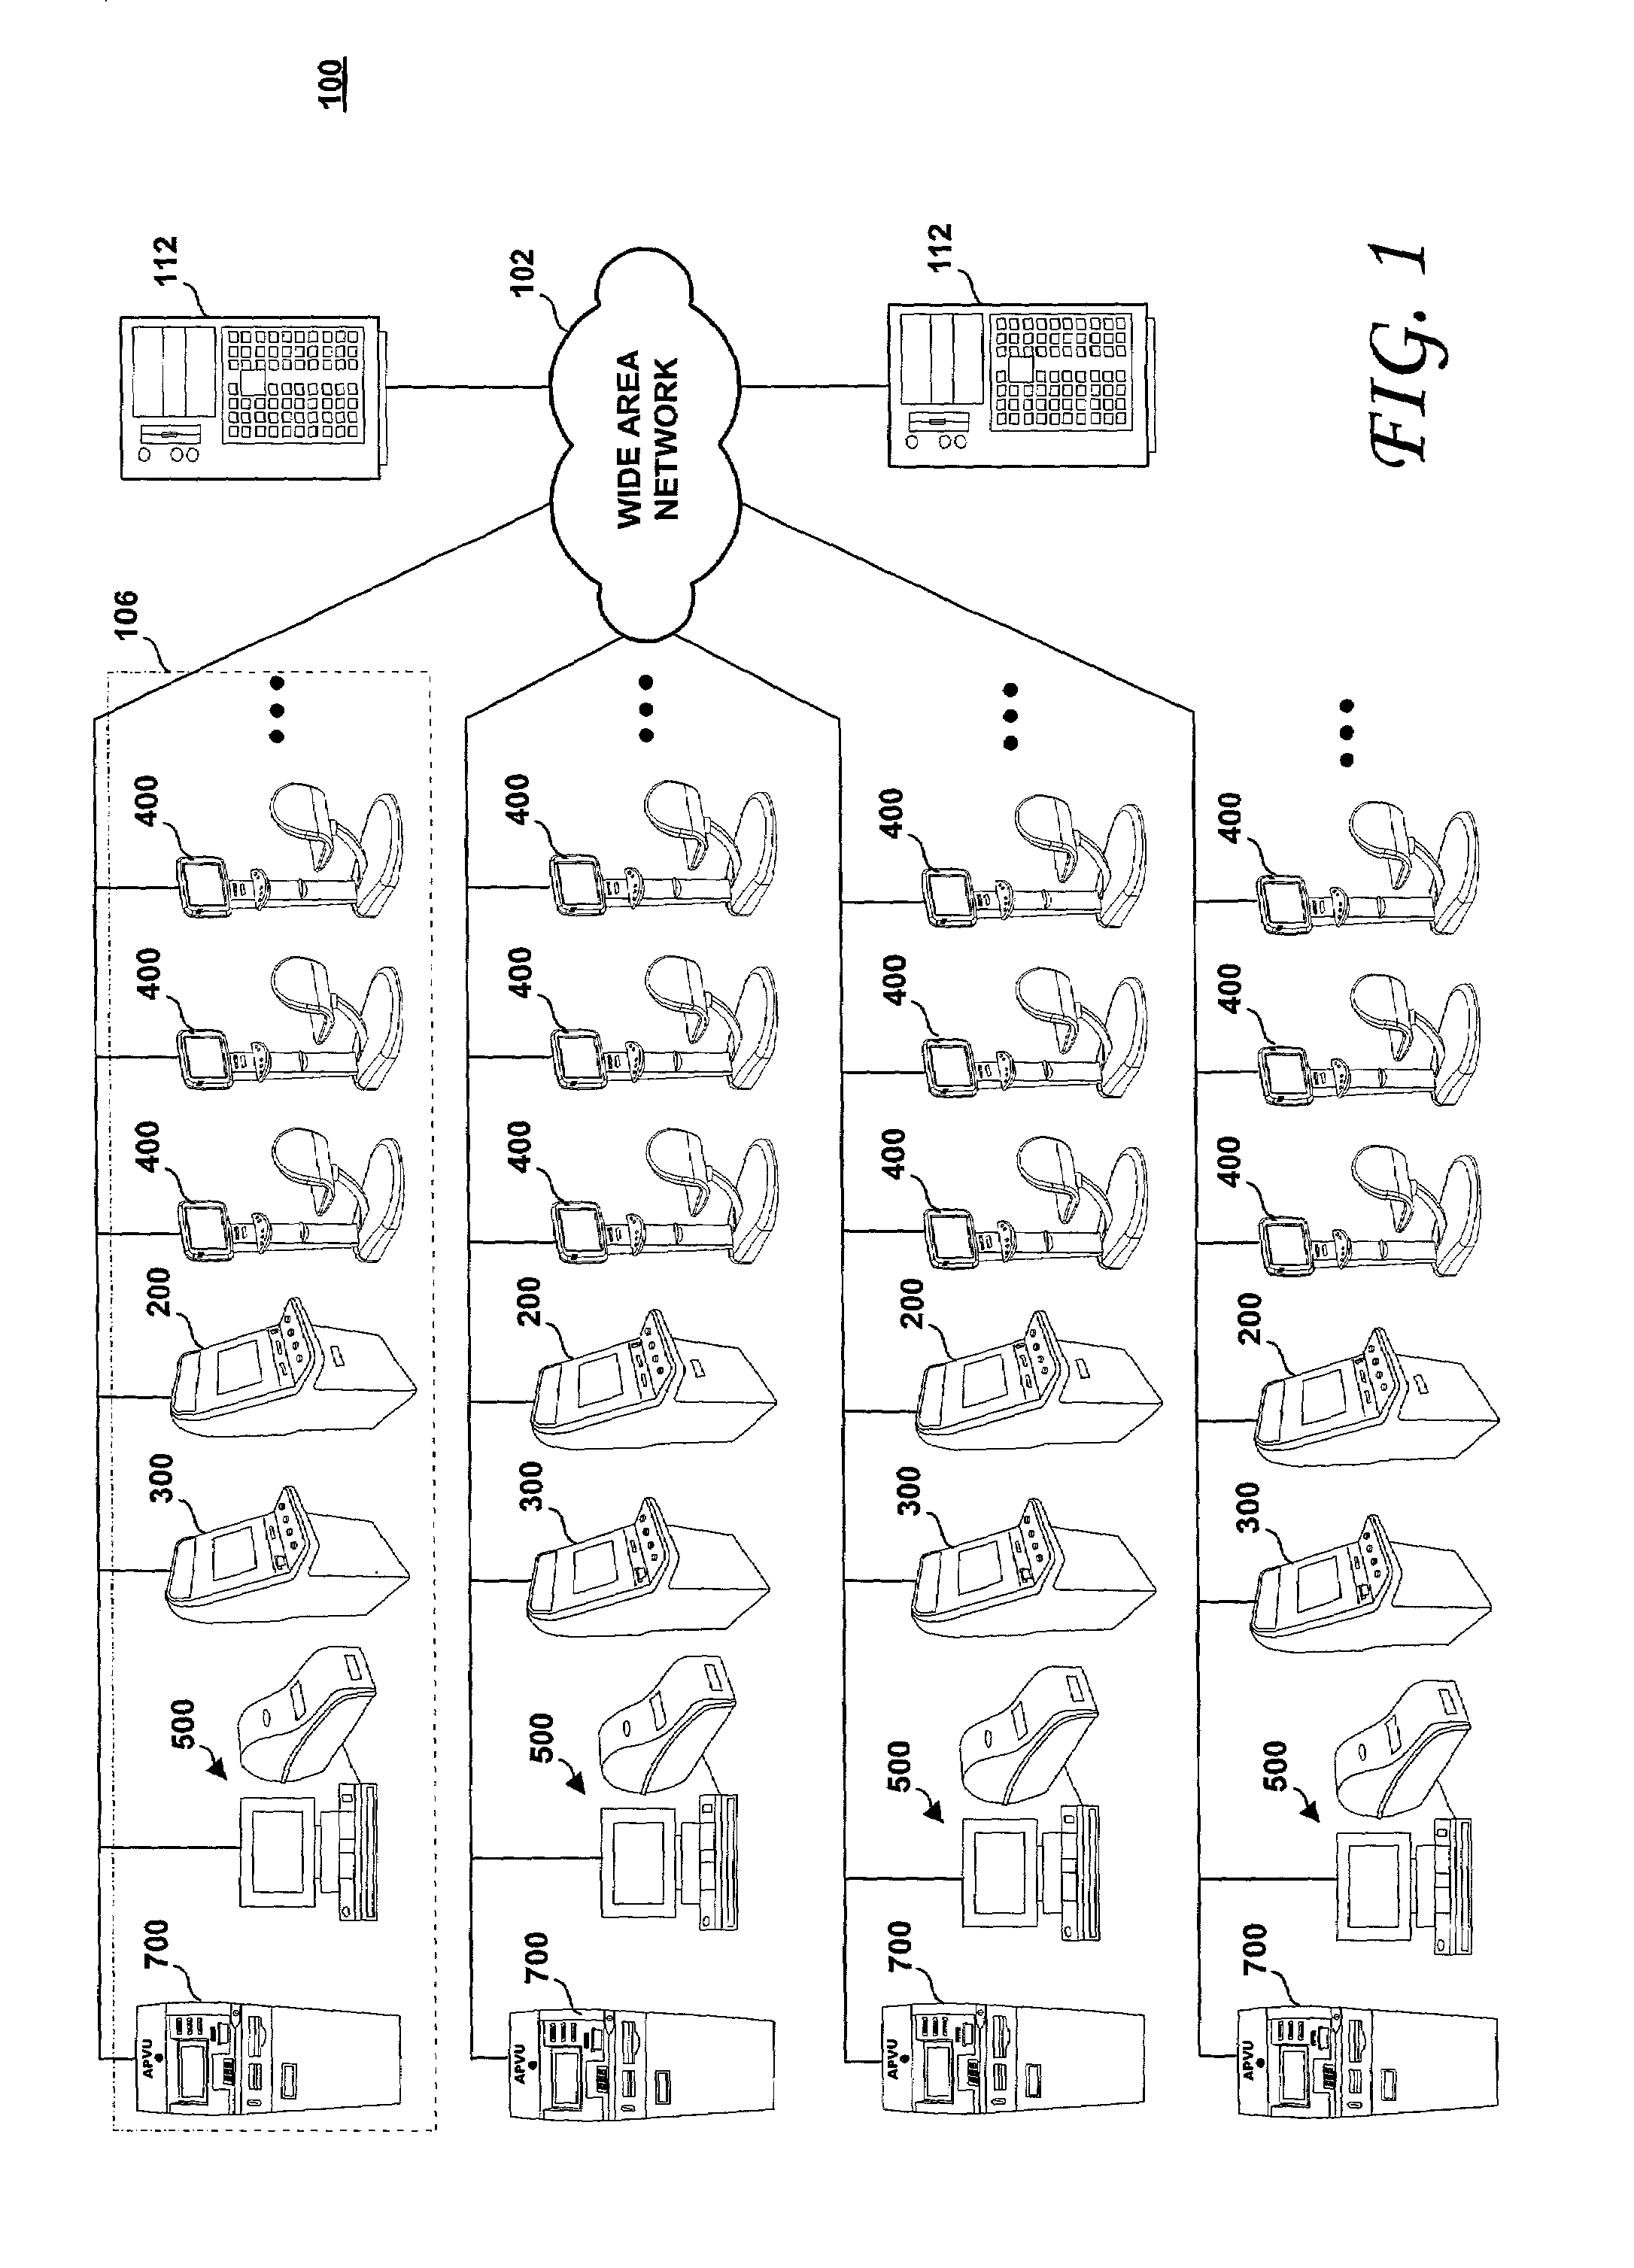 Modular entertainment and gaming systems configured to consume and provide network services